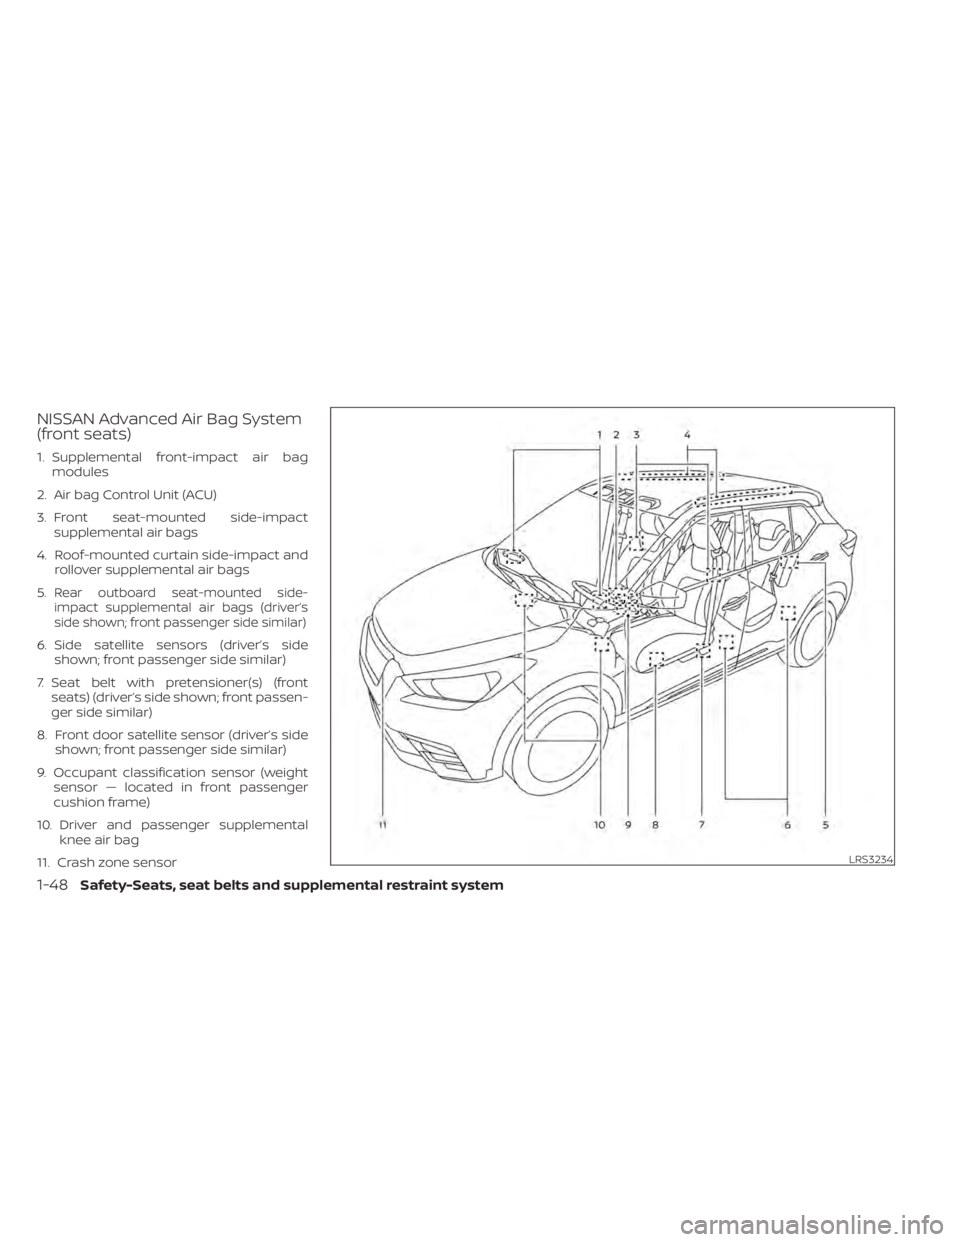 NISSAN KICKS 2022  Owners Manual NISSAN Advanced Air Bag System
(front seats)
1. Supplemental front-impact air bagmodules
2. Air bag Control Unit (ACU)
3. Front seat-mounted side-impact supplemental air bags
4. Roof-mounted curtain s